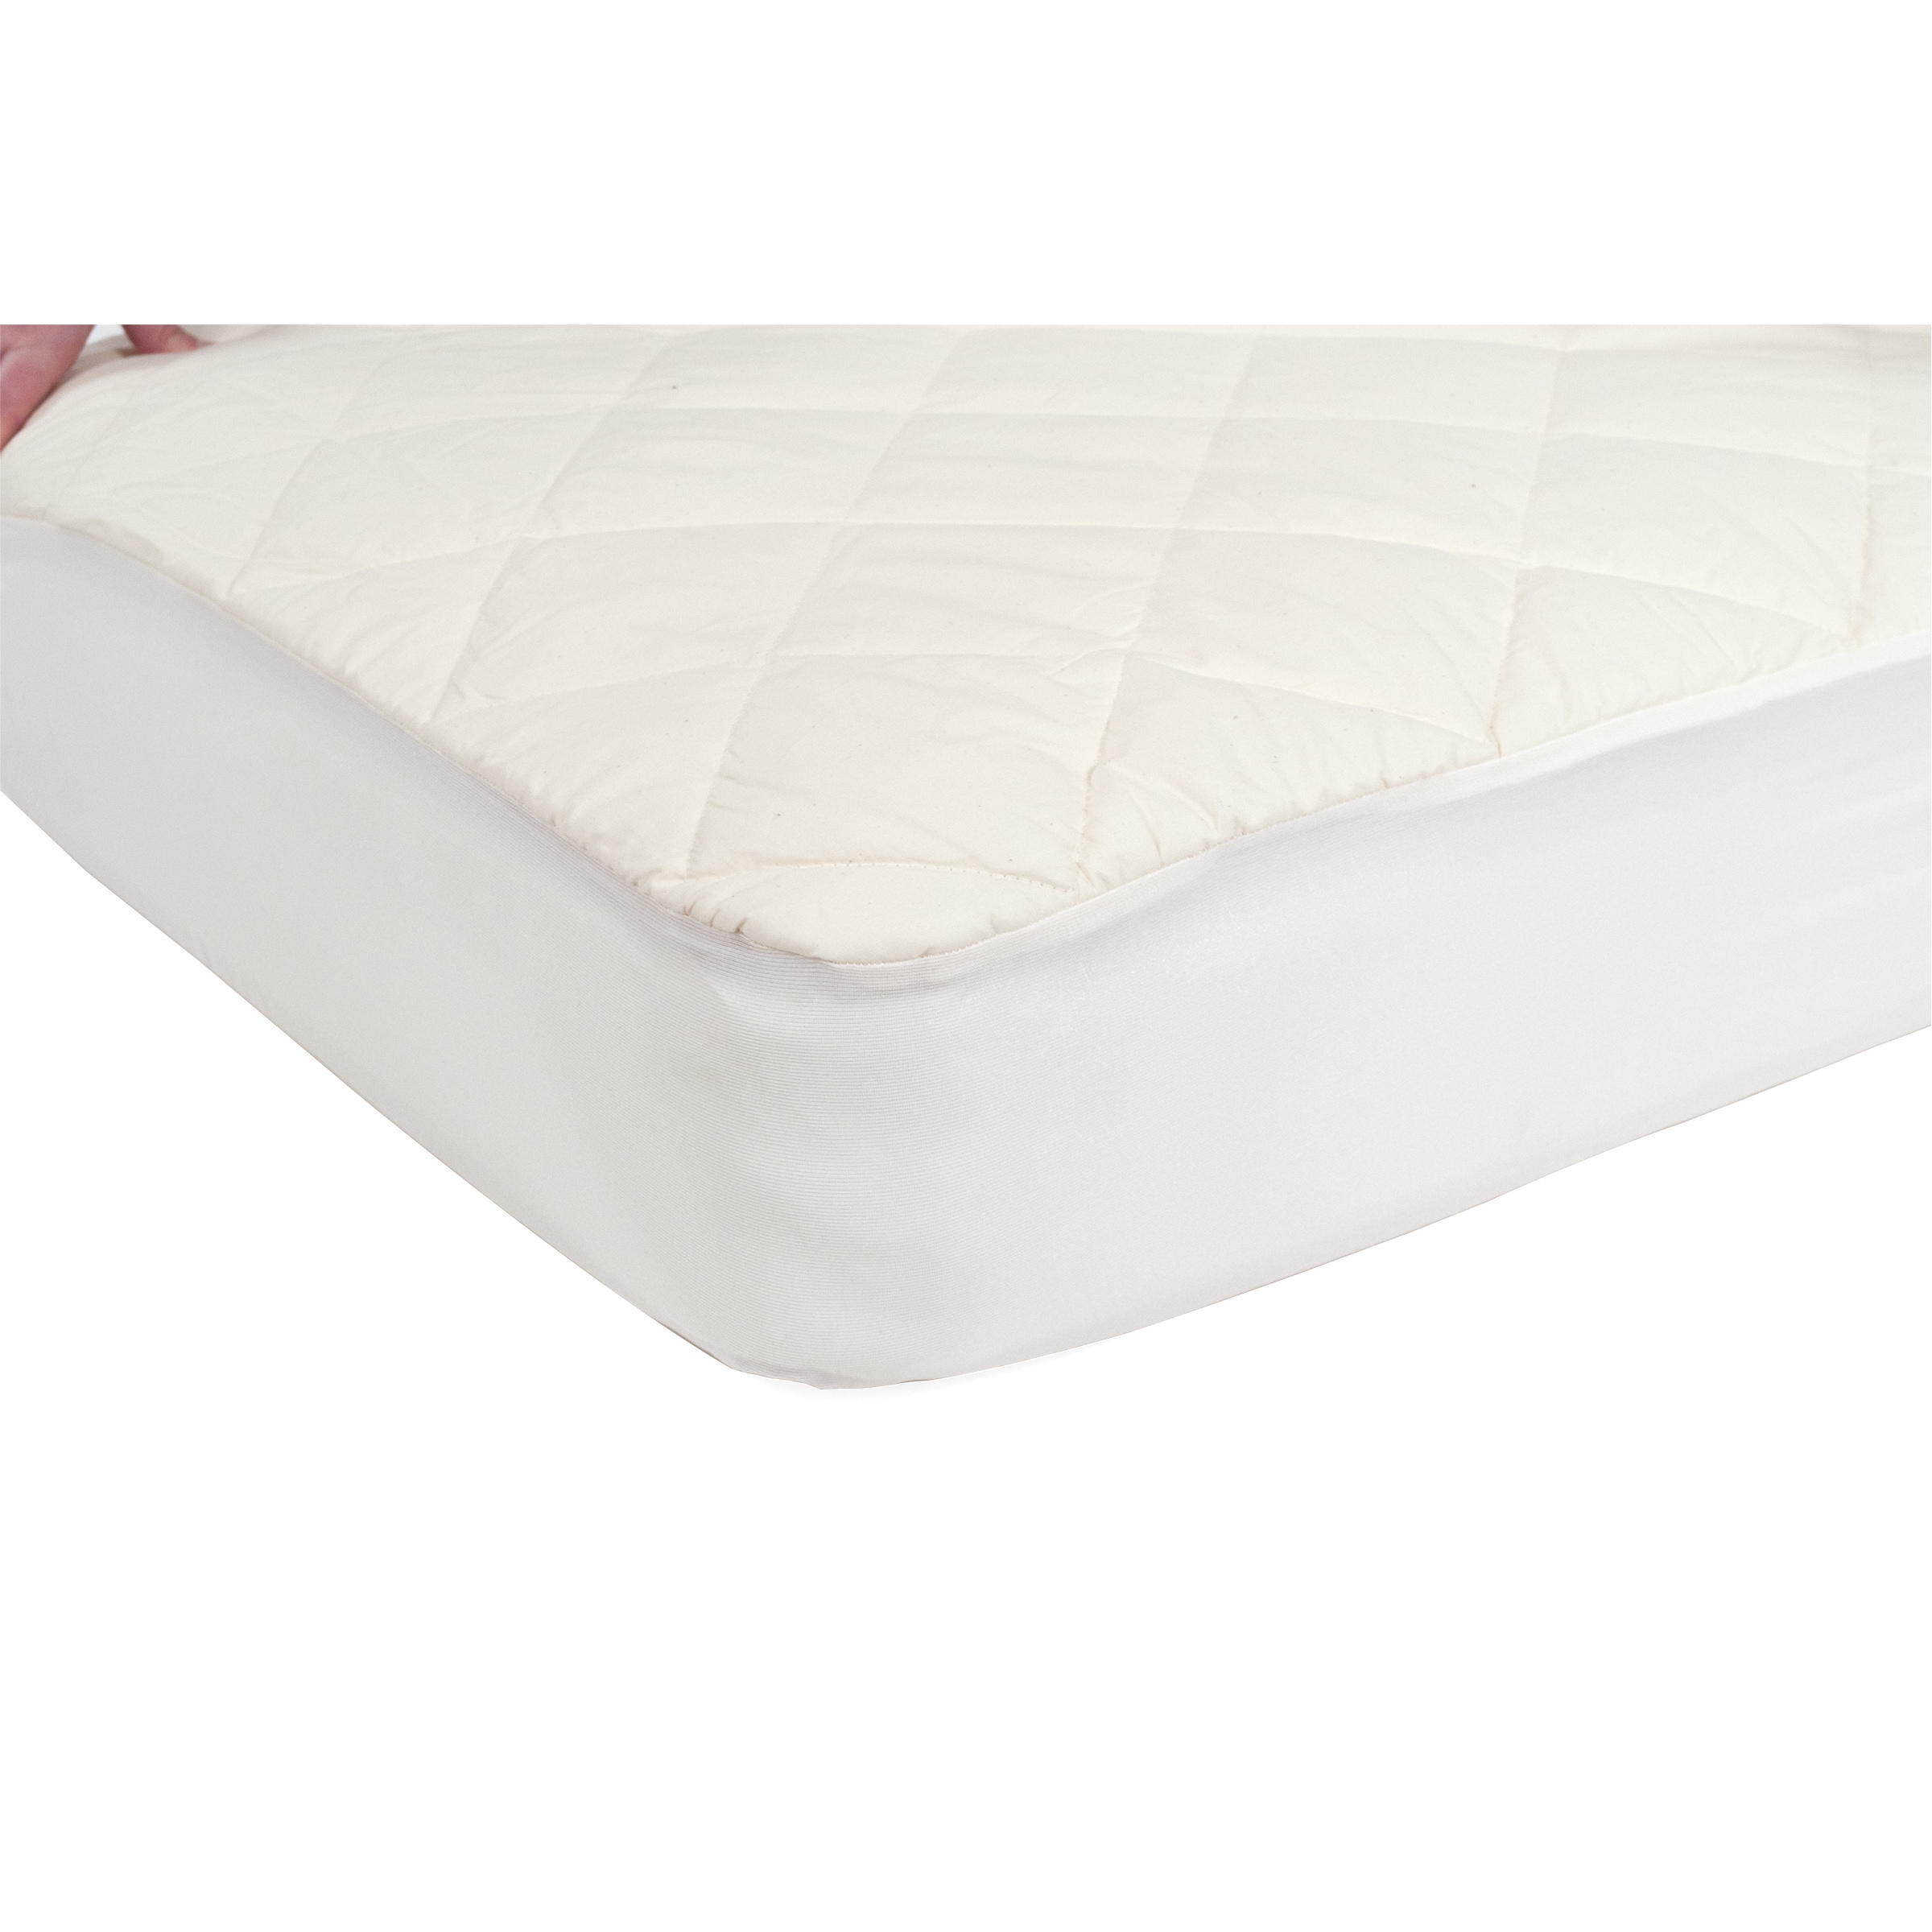 https://ak1.ostkcdn.com/images/products/16702064/Sealy-Quilted-Fitted-Crib-Mattress-Pad-with-Organic-Cotton-Top-and-Waterproof-Layer-Natural-9fe3e39f-d879-4bc4-b2cc-543f07edafc1.jpg